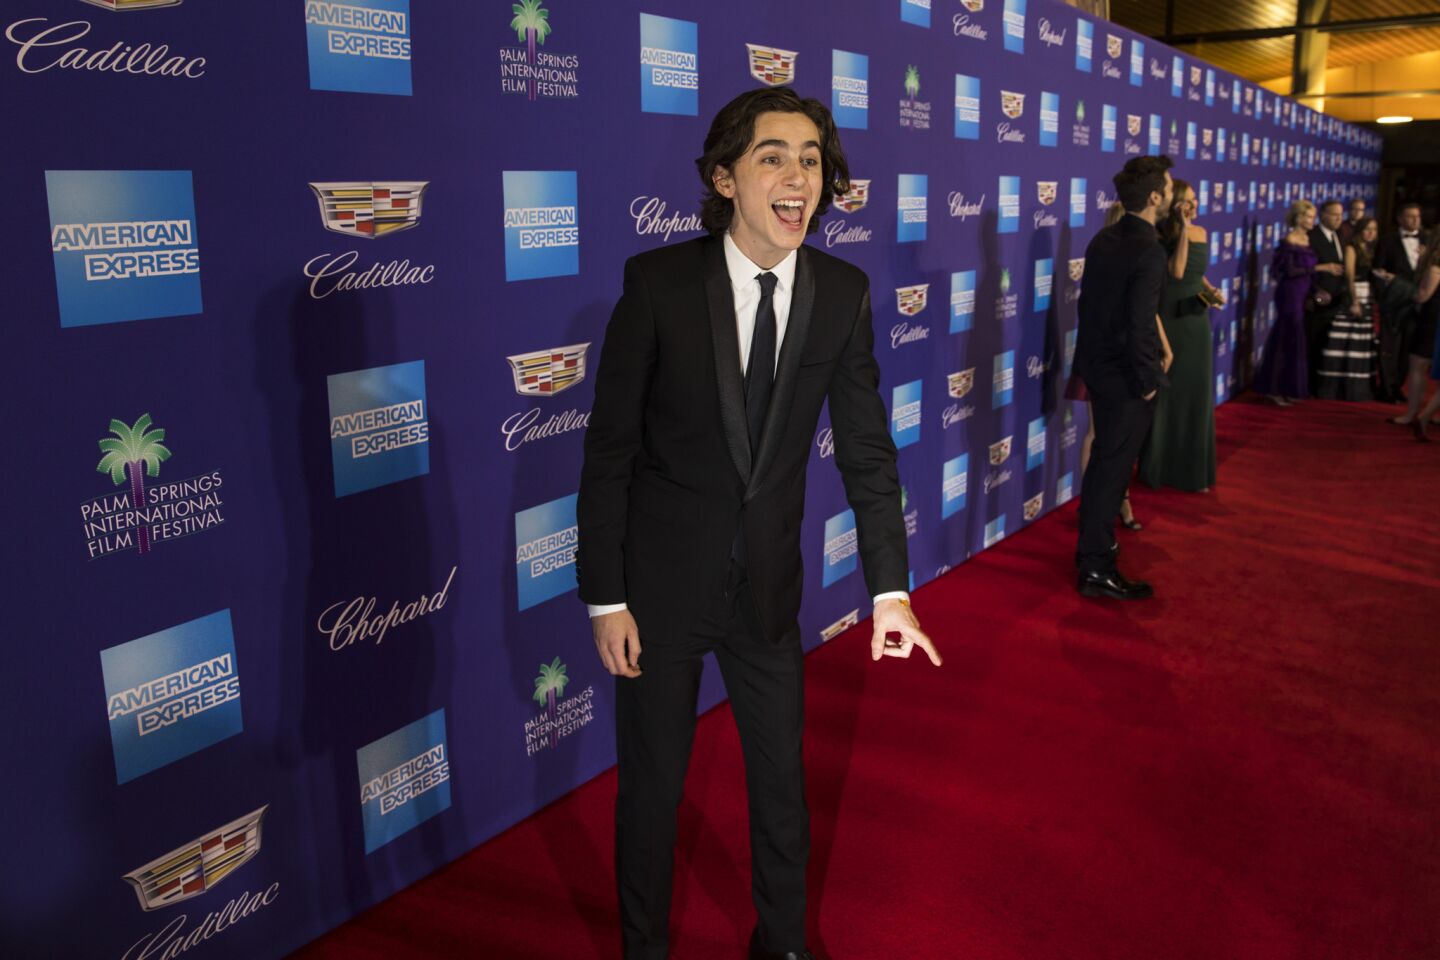 Timothee Chalamet on the red carpet of the 18th annual Palm Springs International Film Festival Gala at the Palm Springs Convention Center. Chalamet received the Rising Star Award.